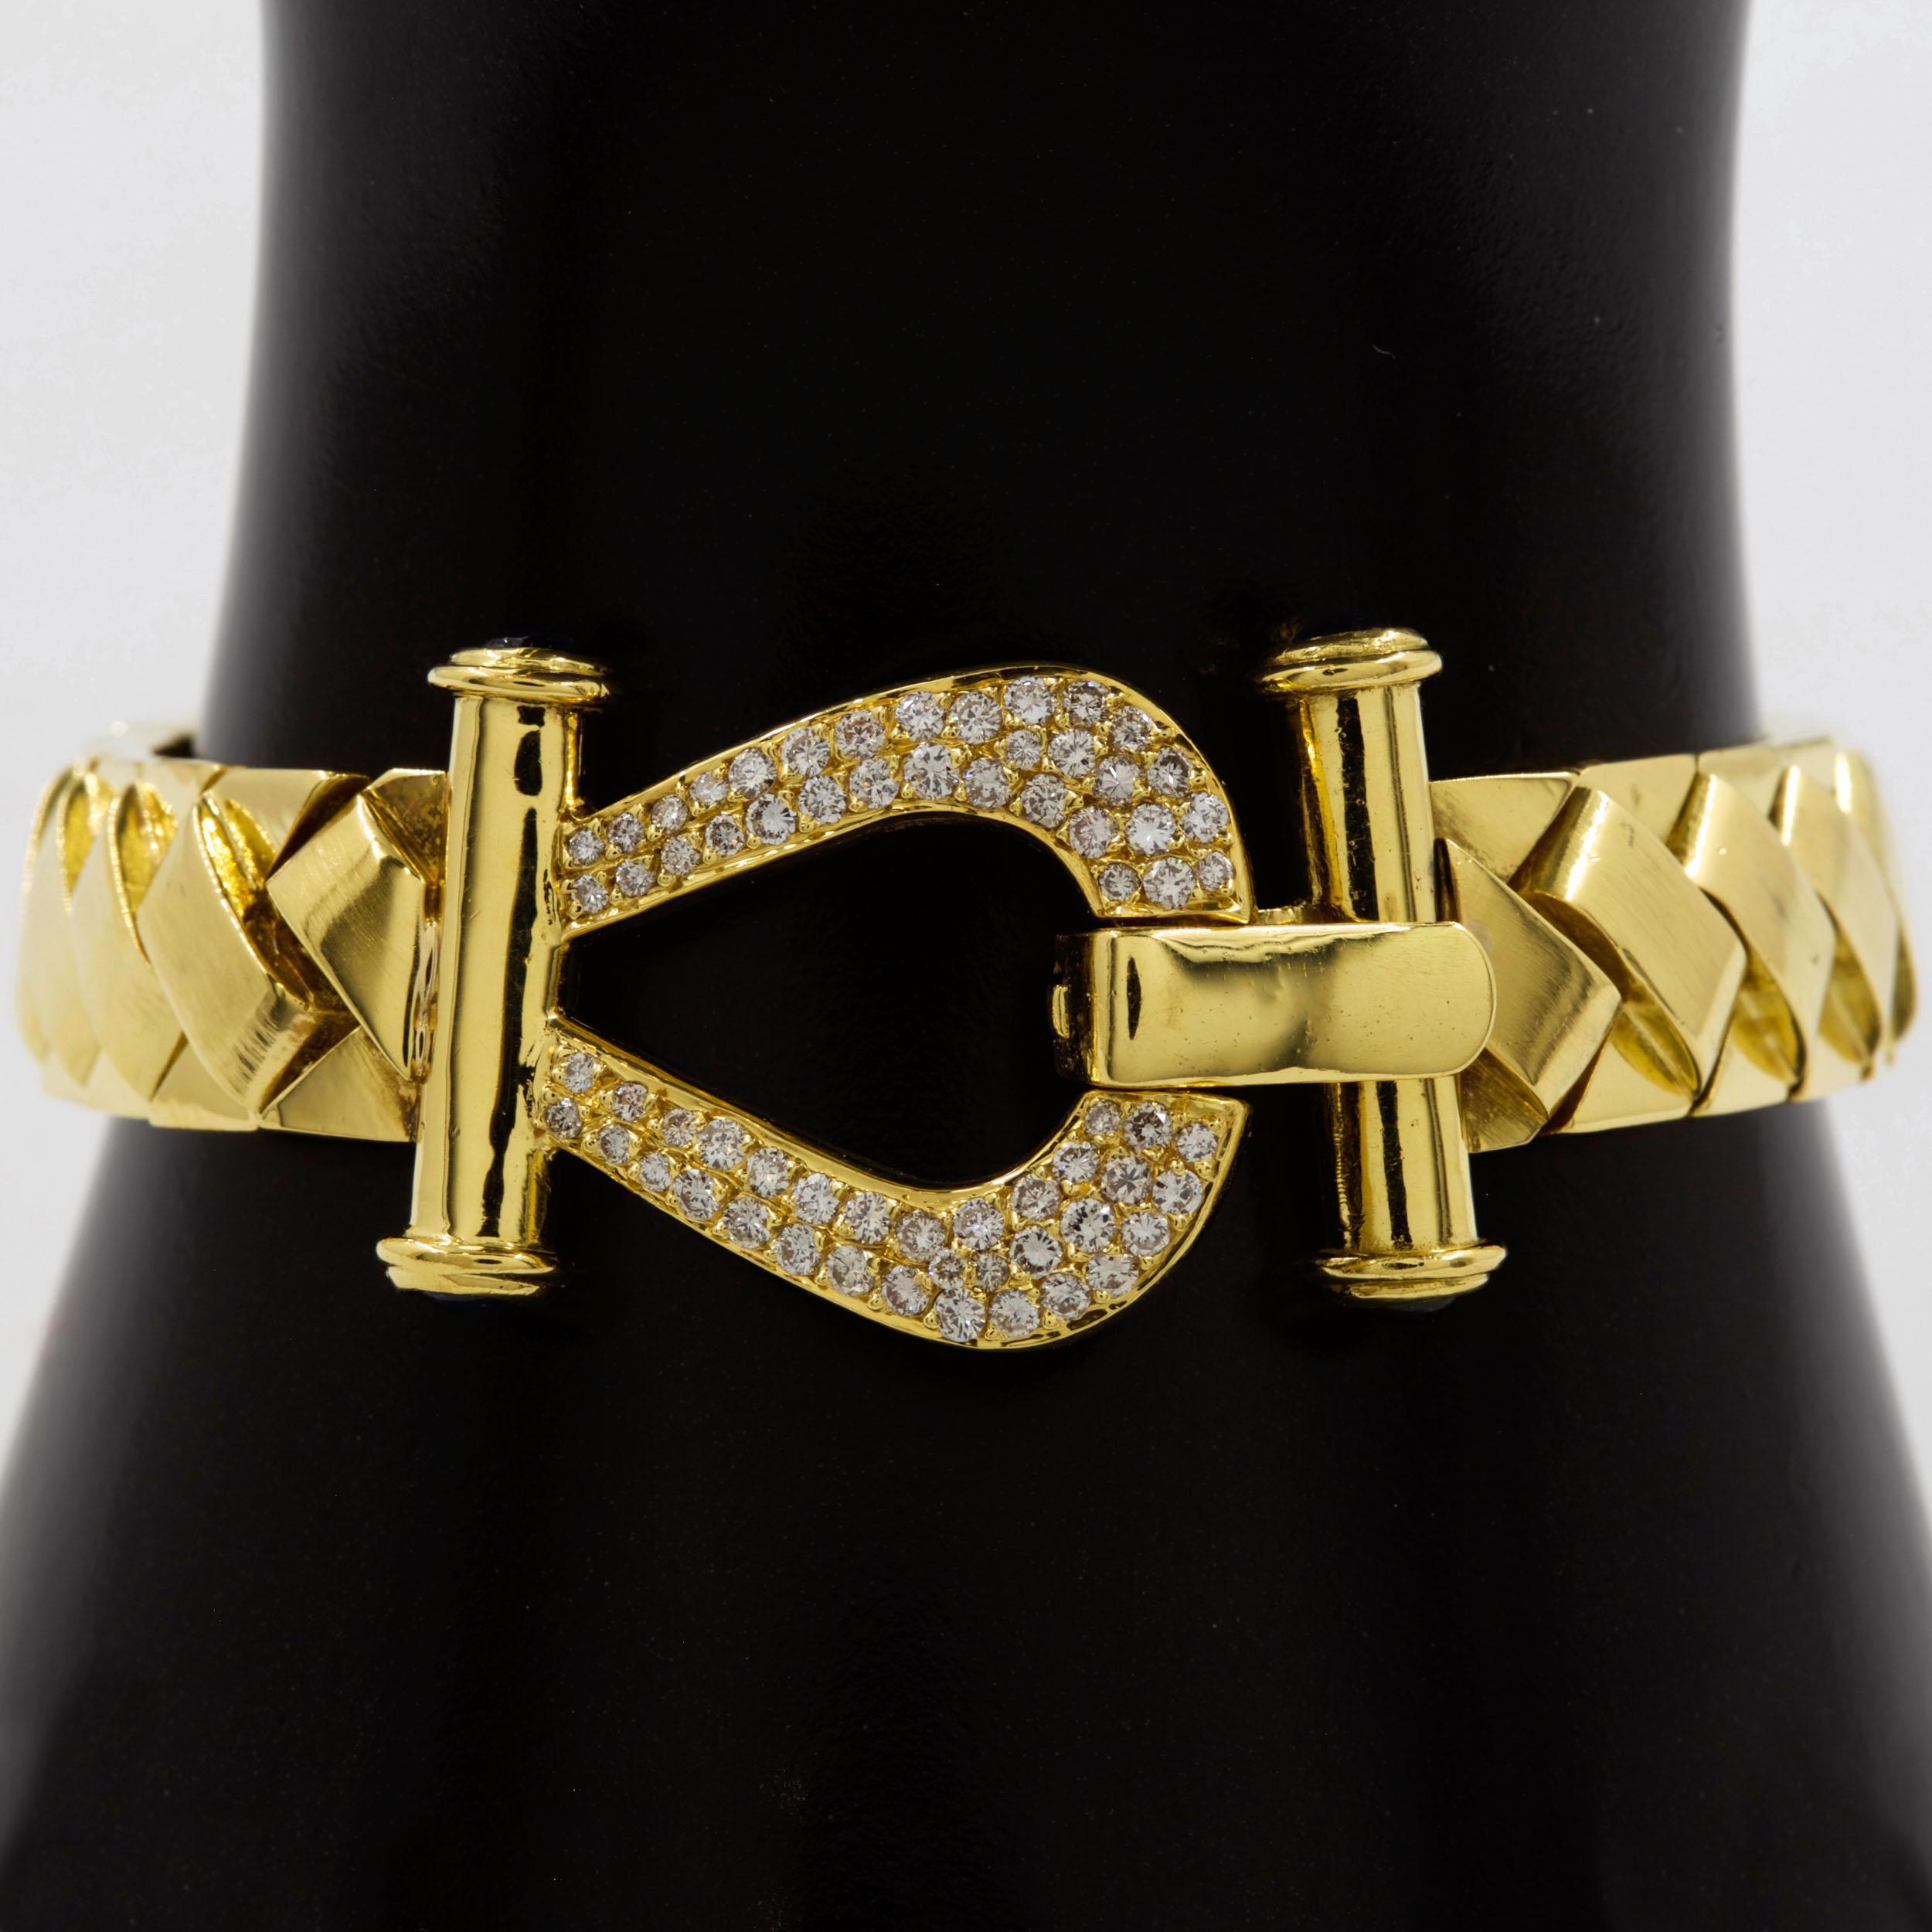 WOVEN YELLOW GOLD BRACELET WITH DIAMOND-AND-SAPPHIRE HORSESHOE CLASP
Circa late 20th century
Item # 012MGP03W

A truly exquisite evening bracelet, this elegant design is a complex display of woven links with a brushed finish on the upper links and a